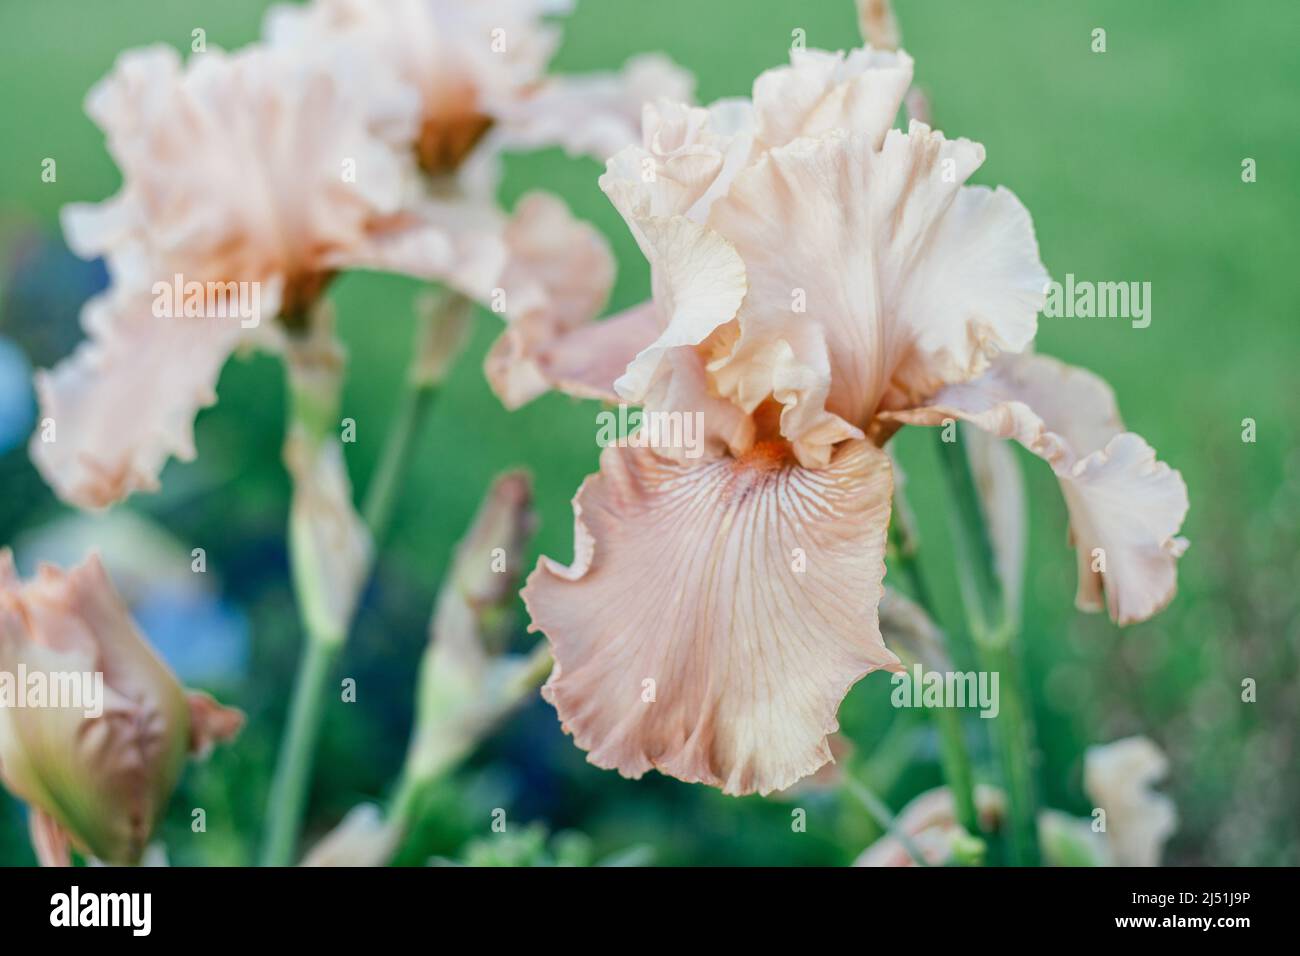 Gorgeous inflorescence of soft pink, peach flower of iris with wavy petals blossoming in garden. Nature and spring, gardening and horticulture concept Stock Photo